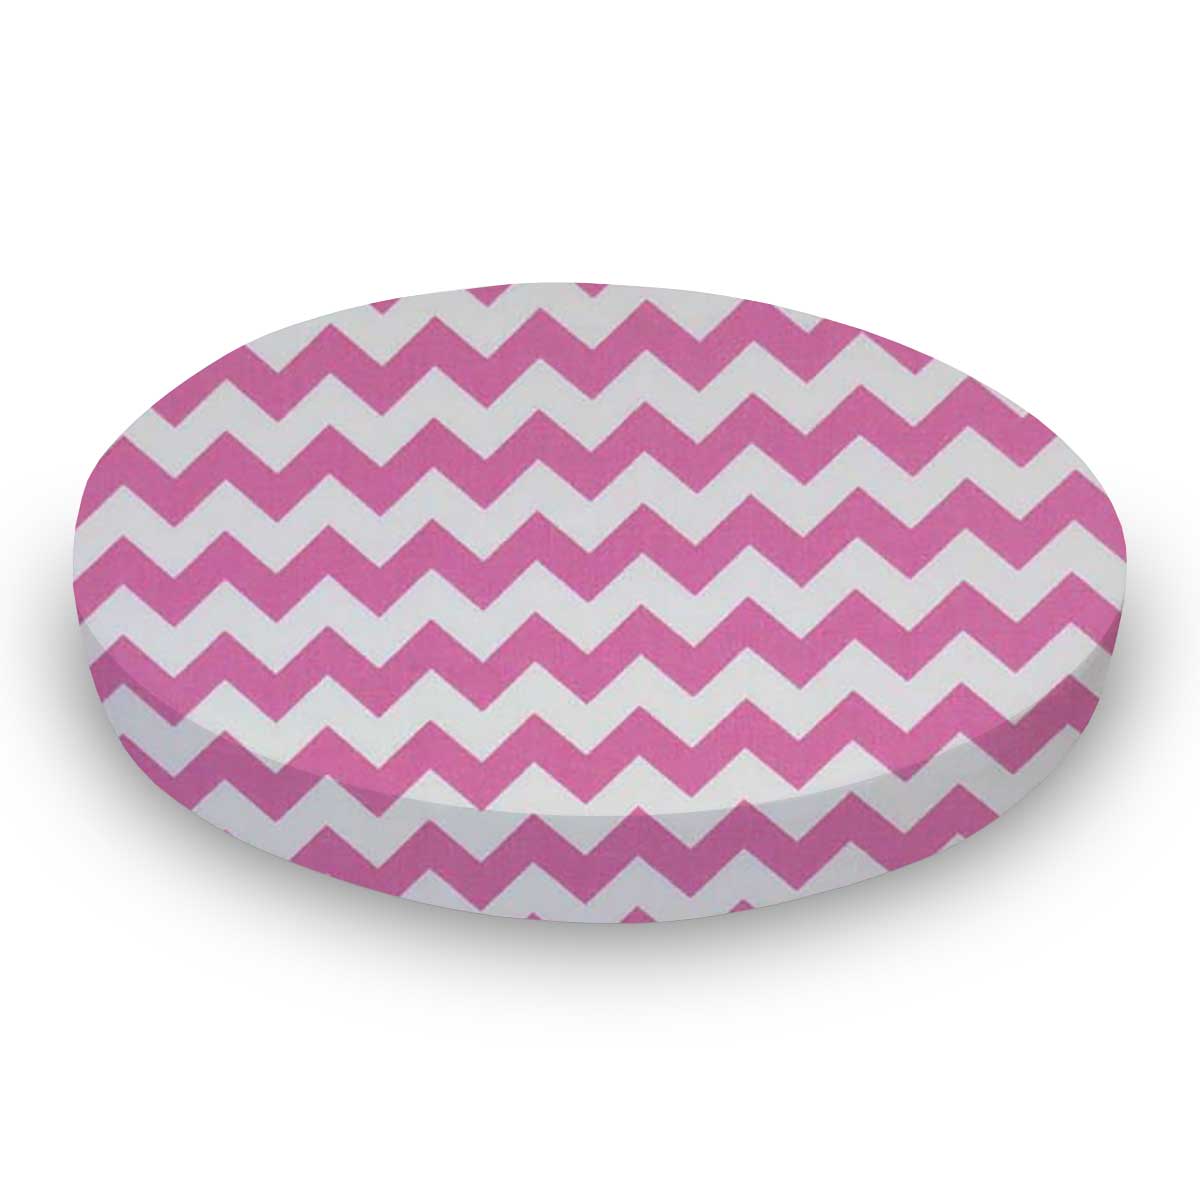 Oval (Stokke Mini) - Bubble Gum Pink Chevron Zigzag - Fitted  Oval